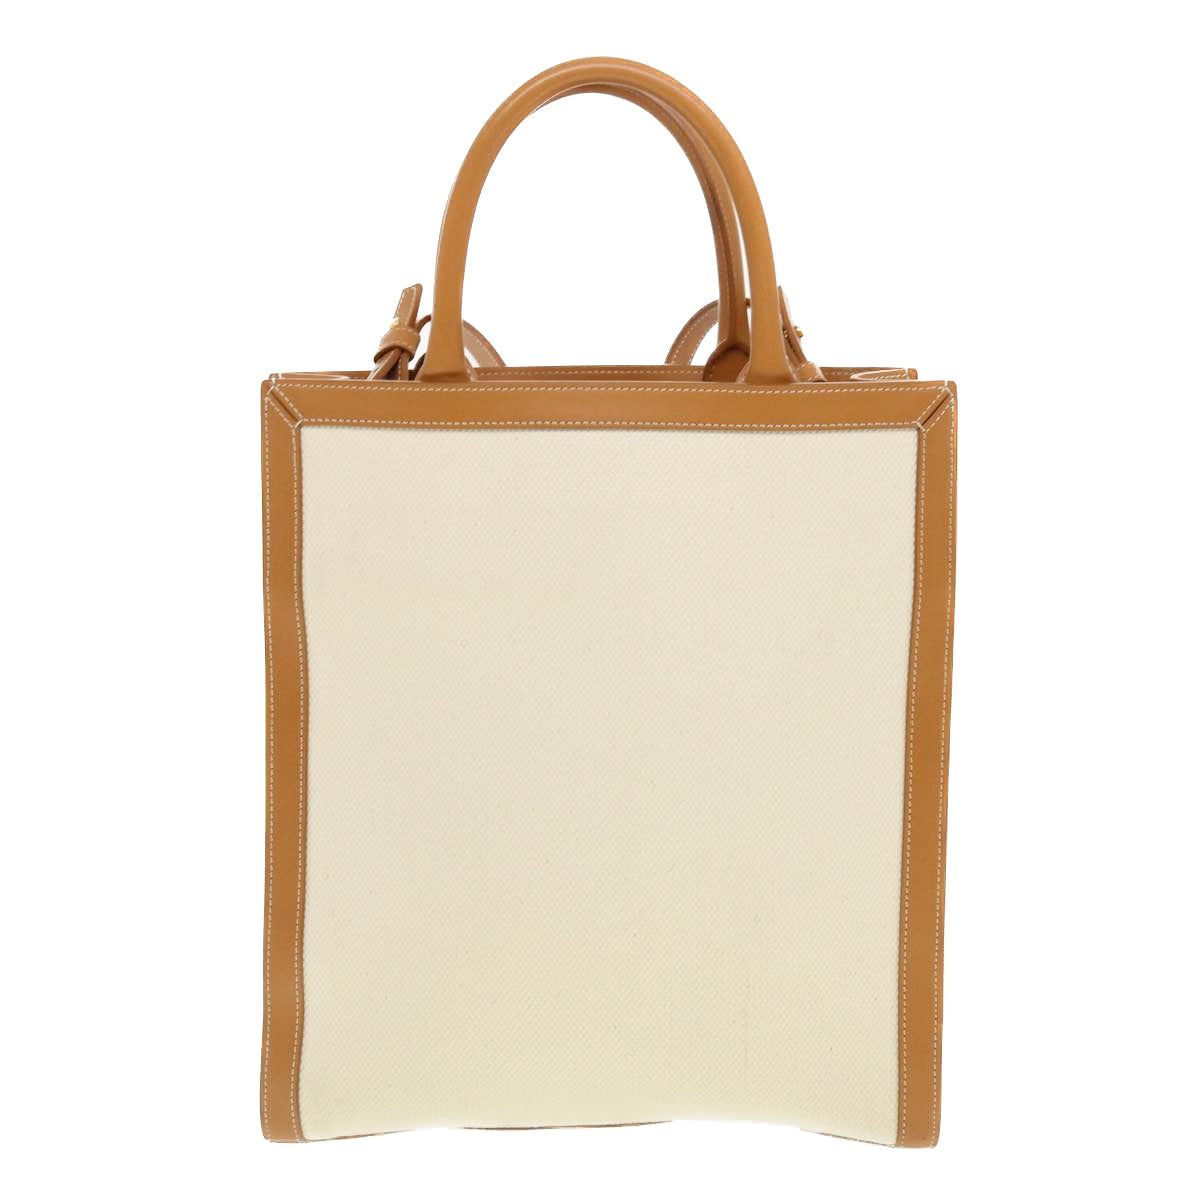 CELINE Small Vertical Cabas Tote Bag Canvas 2way White 192082BNZ.02NT 41168A - 0